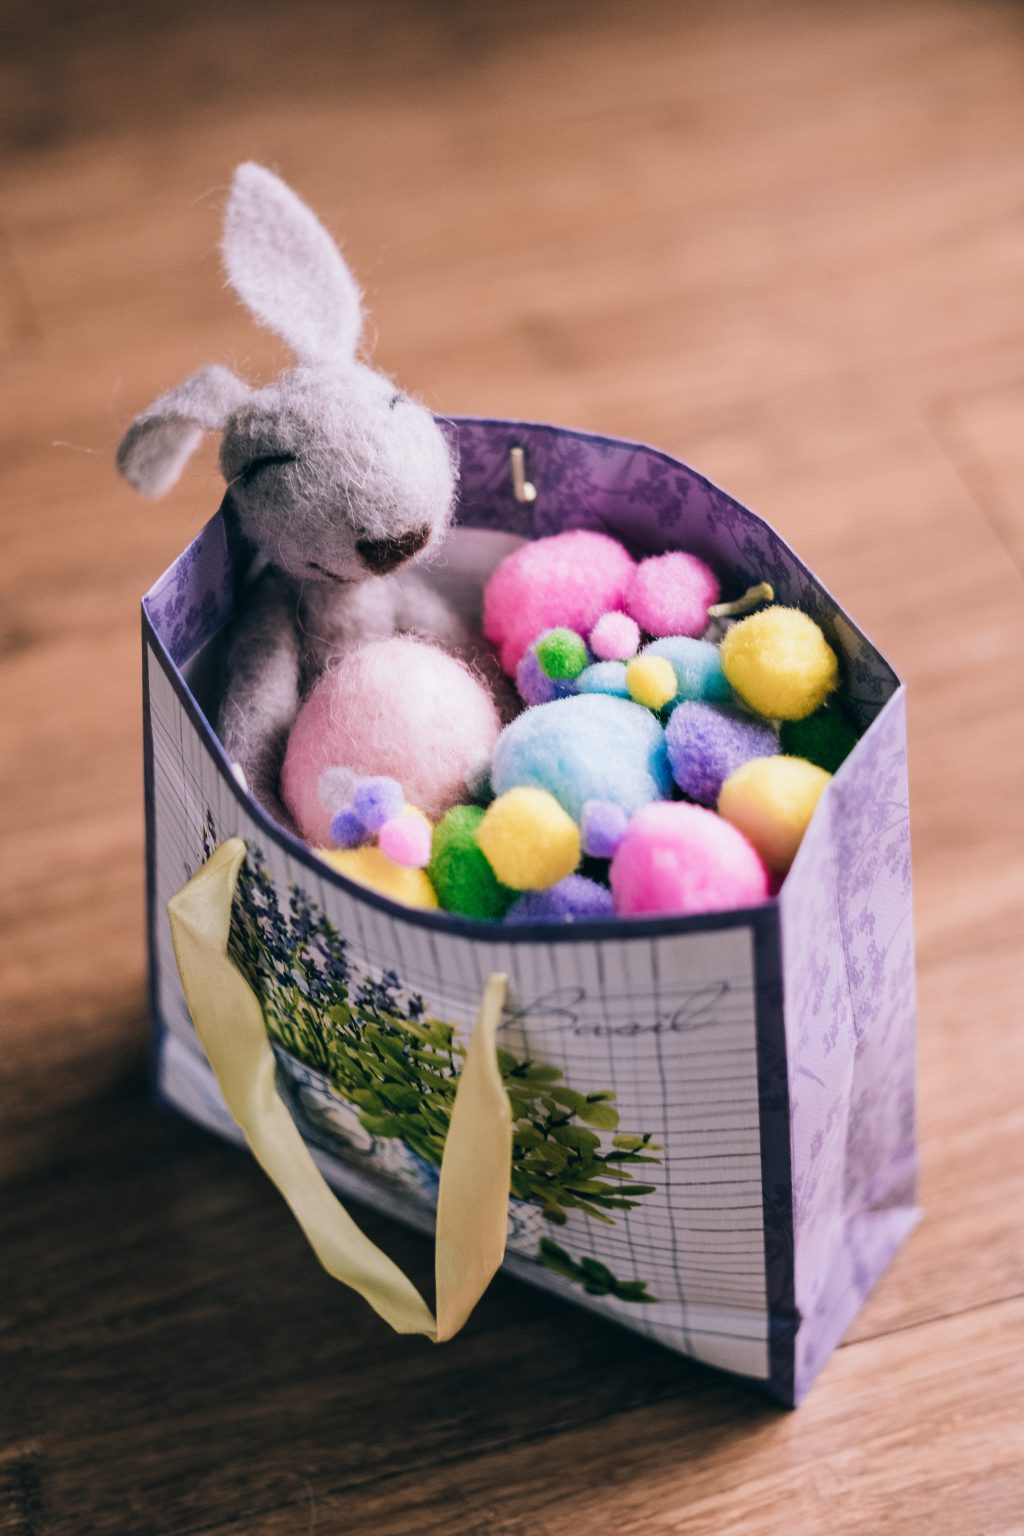 Easter bunny gift 5 - free stock photo